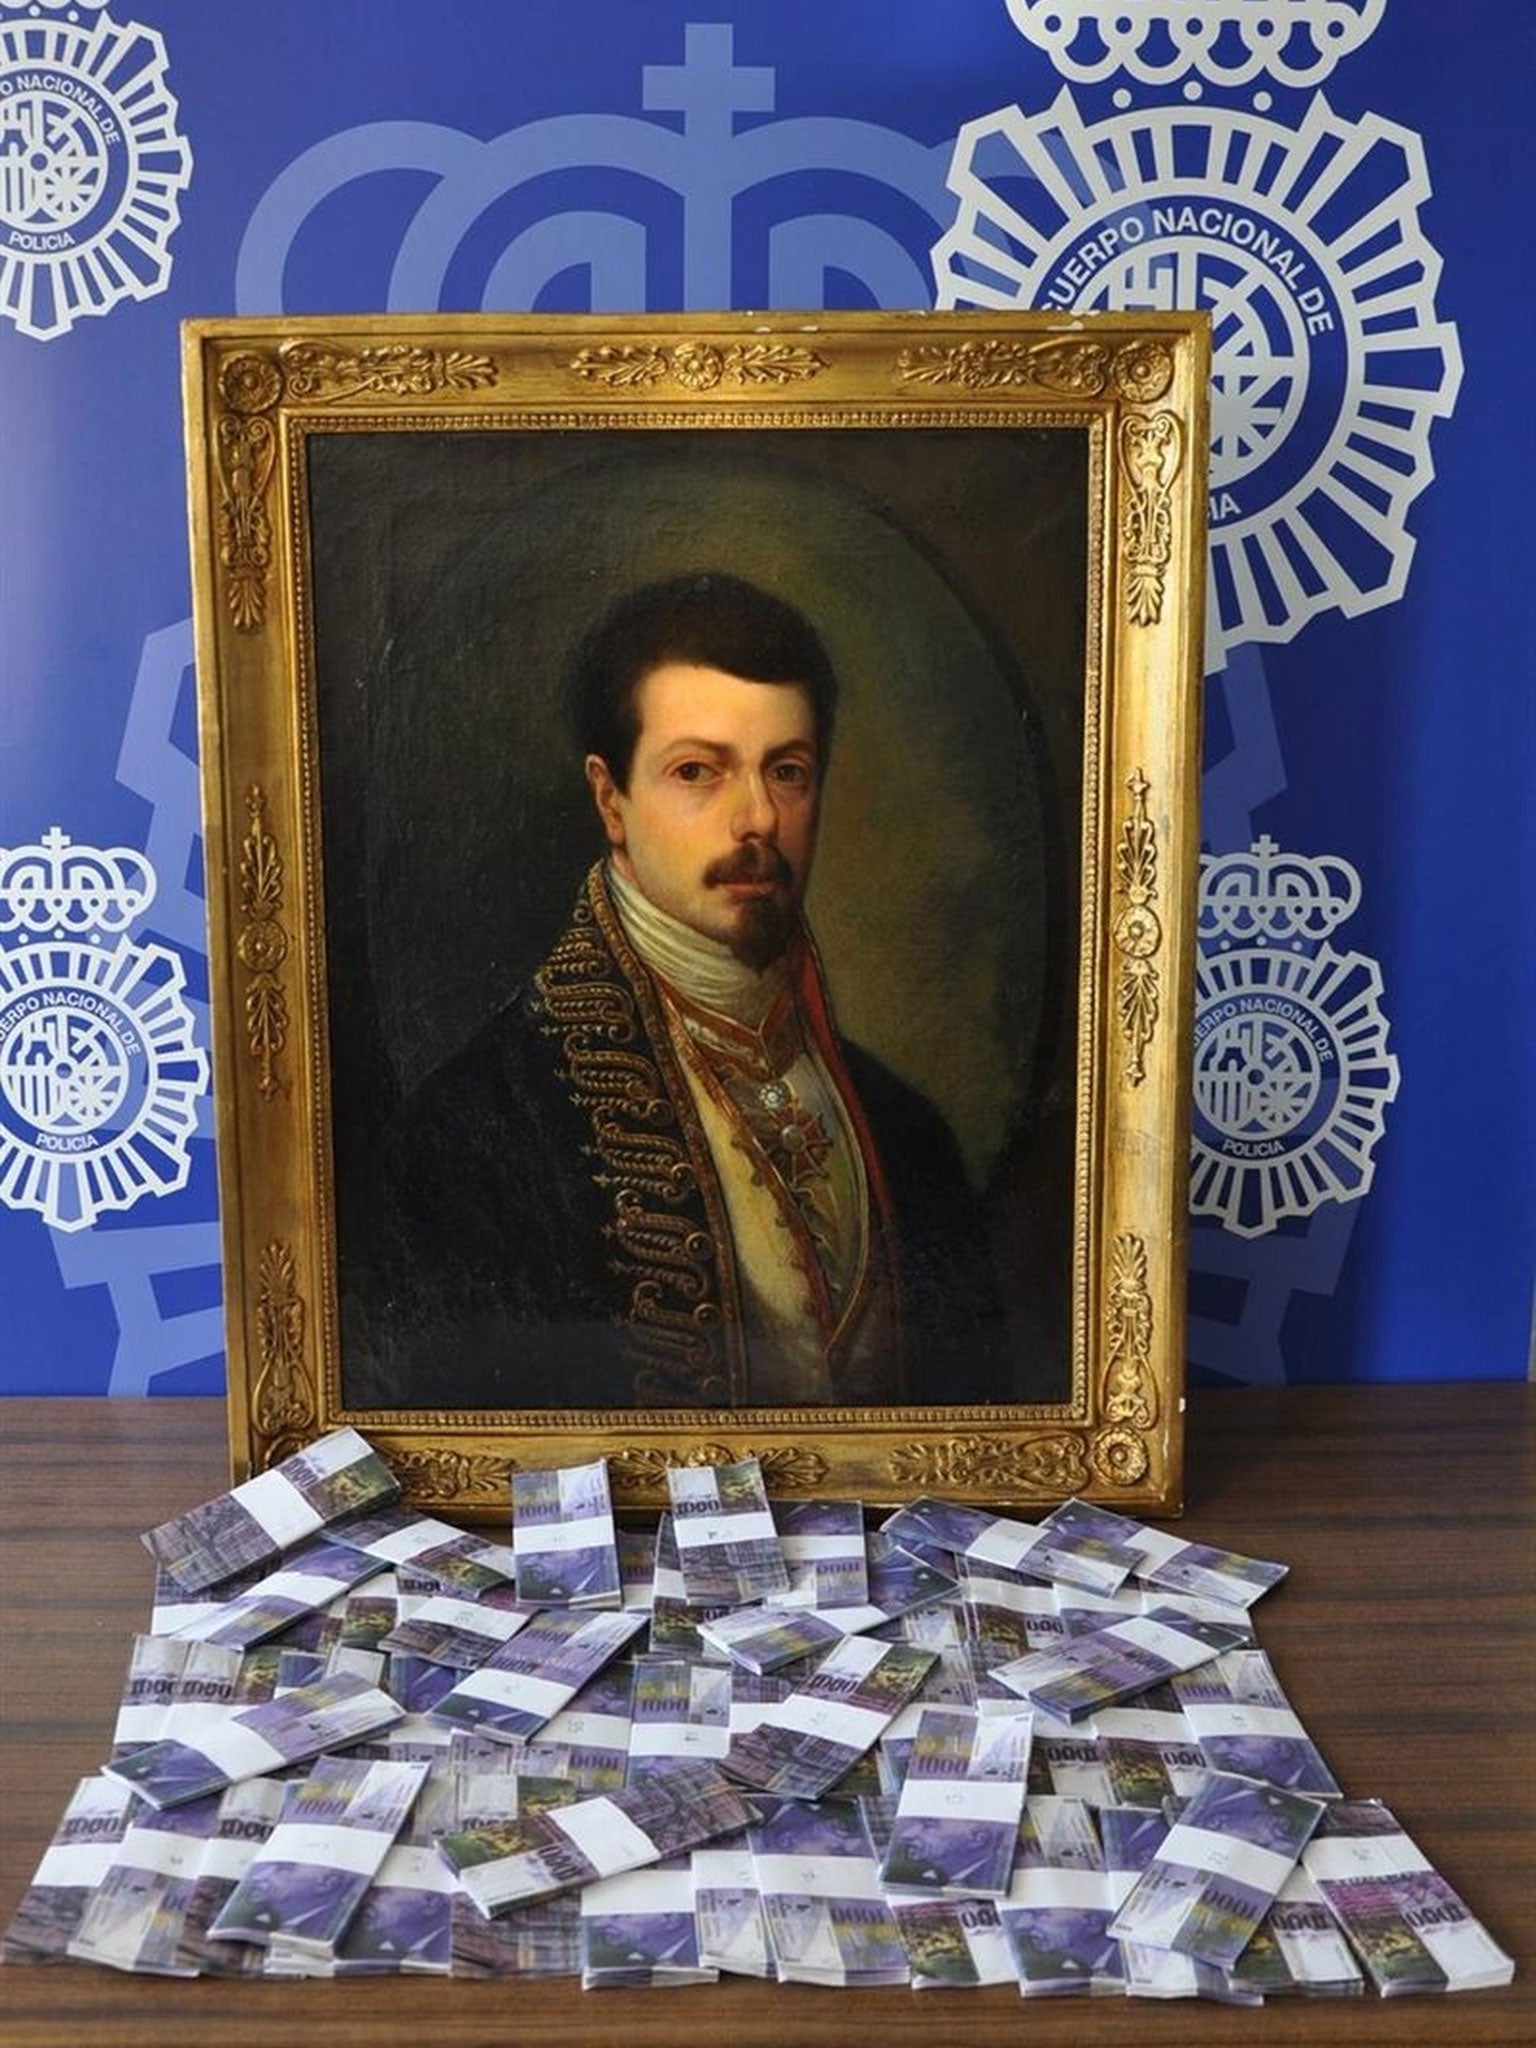 The painting and the ‘loot’: 1.7m counterfeit Swiss Francs